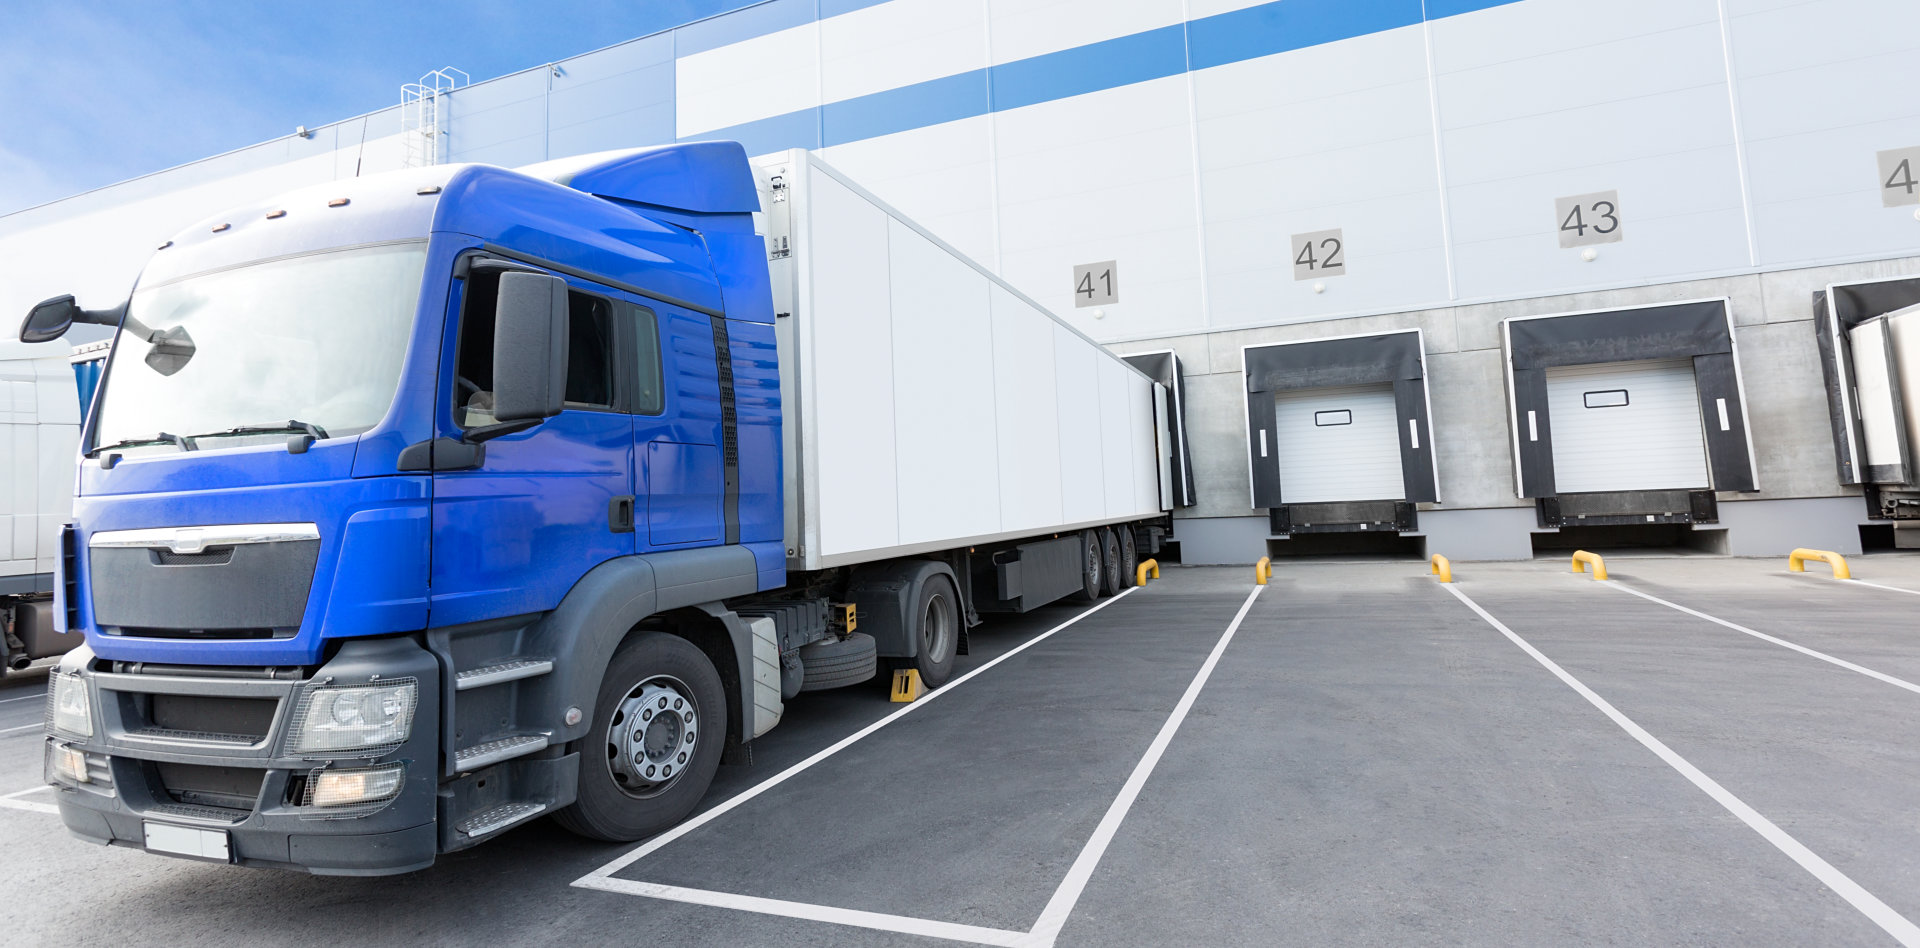 Blue Truck and Gates of Big distribution warehouse